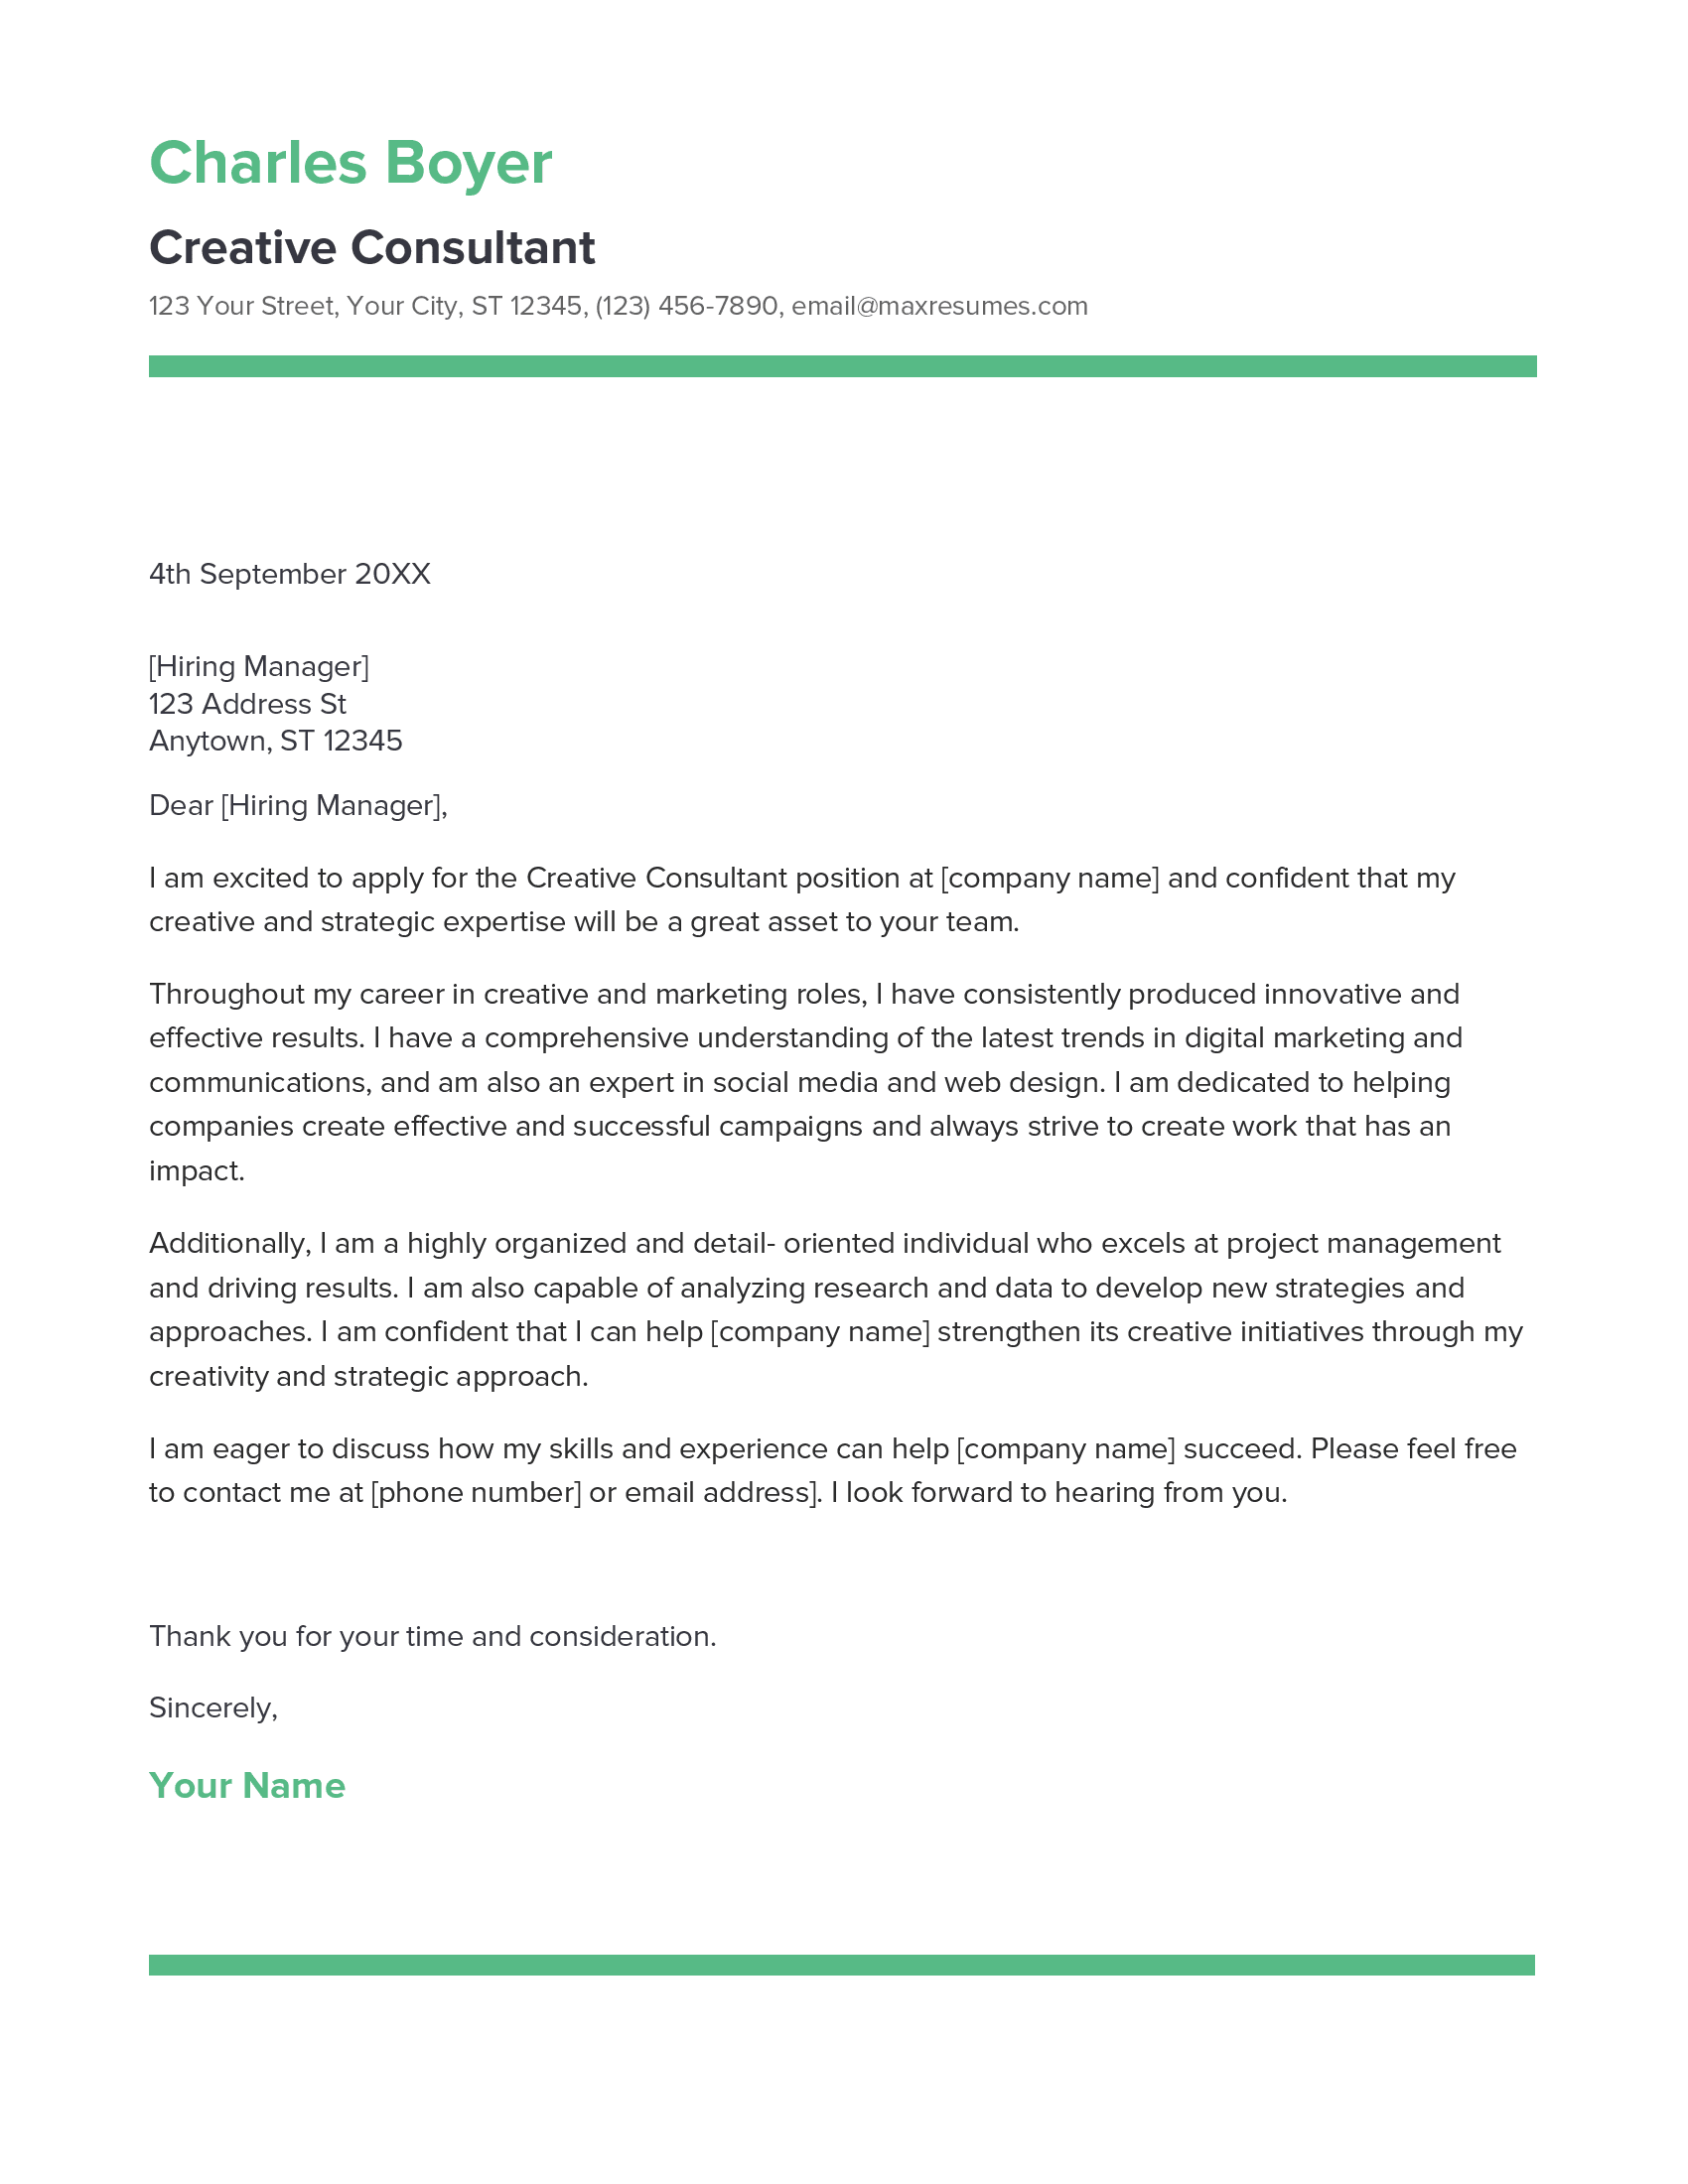 Creative Consultant Cover Letter Example